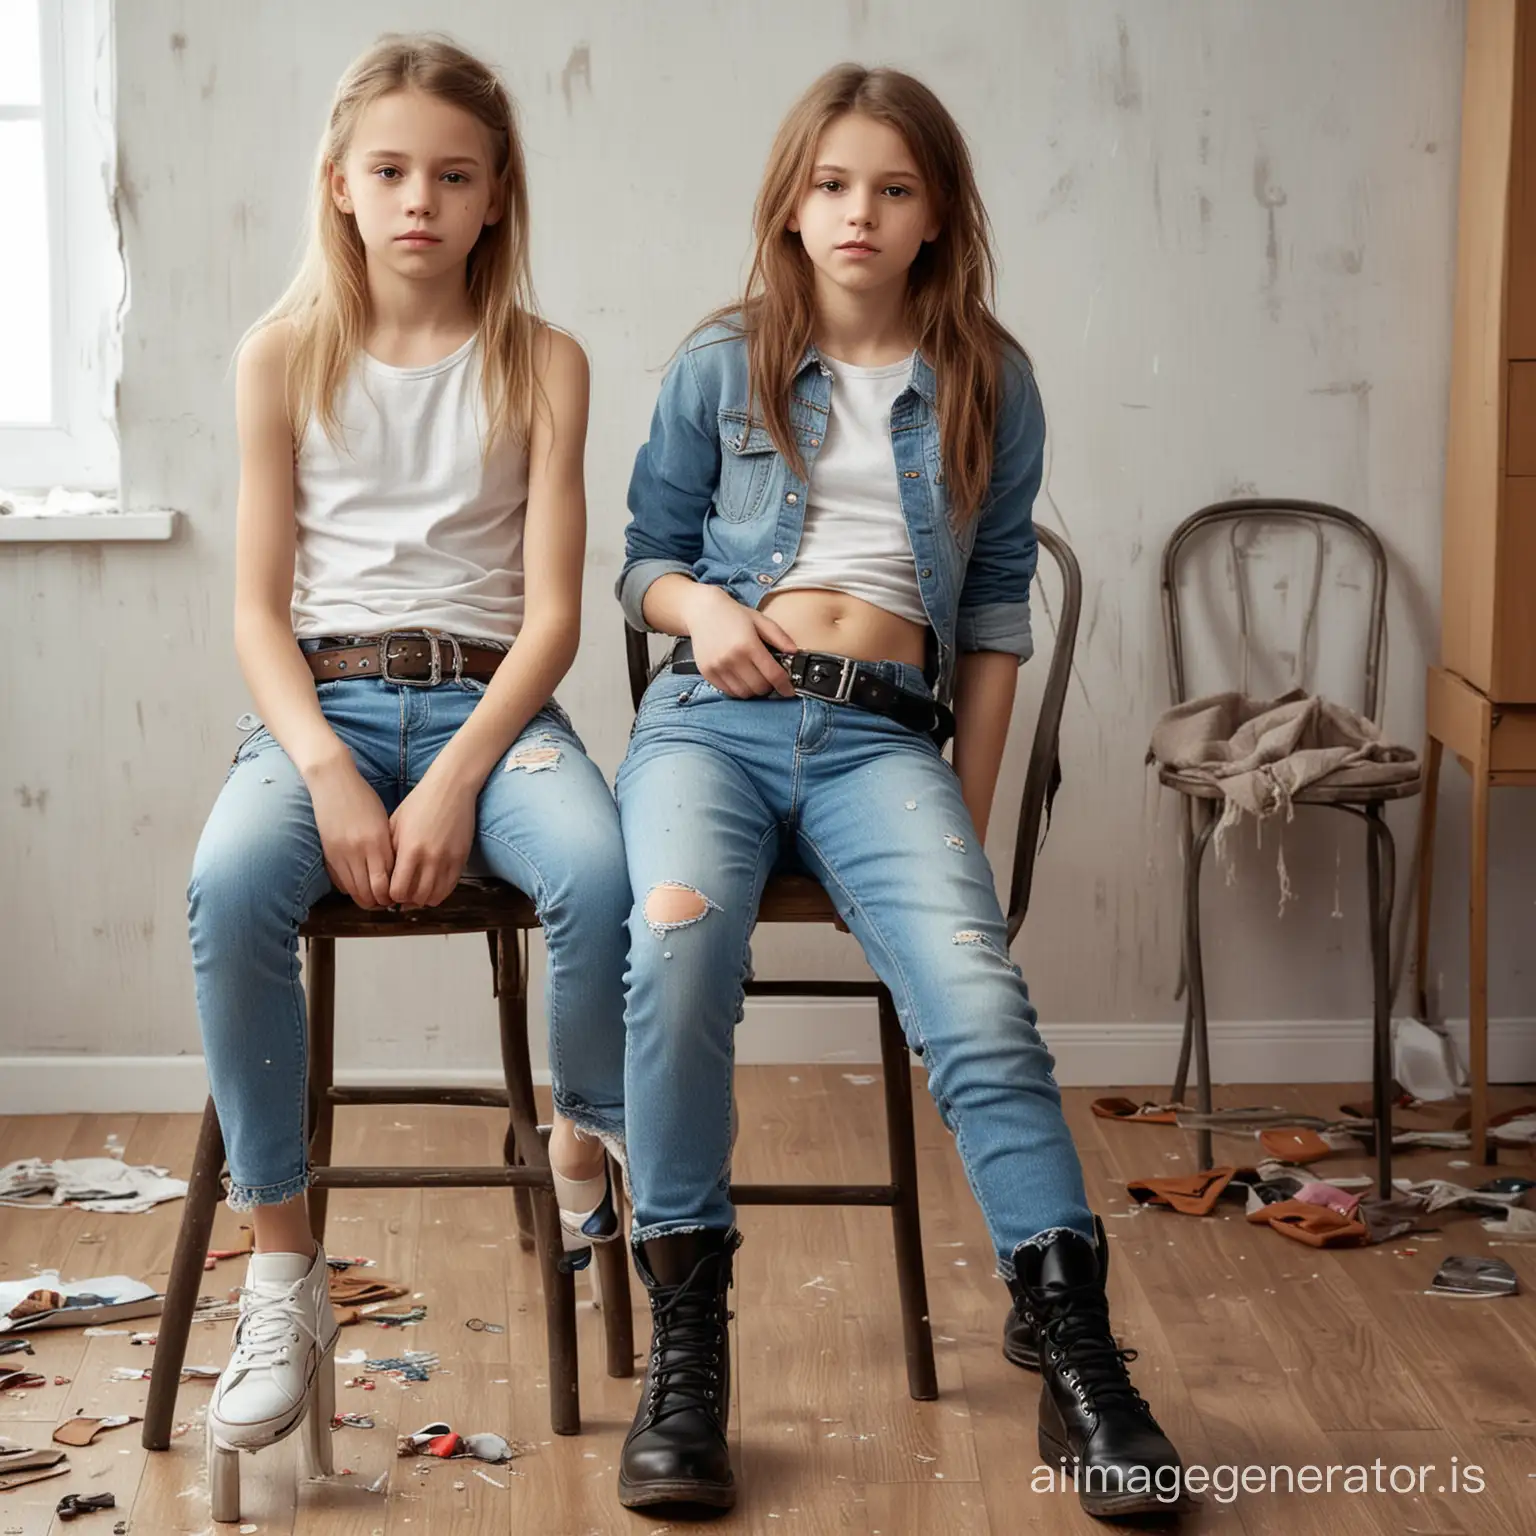 Realistic-Portrait-of-Two-Stern-Teenage-Girls-in-a-Messy-Bedroom